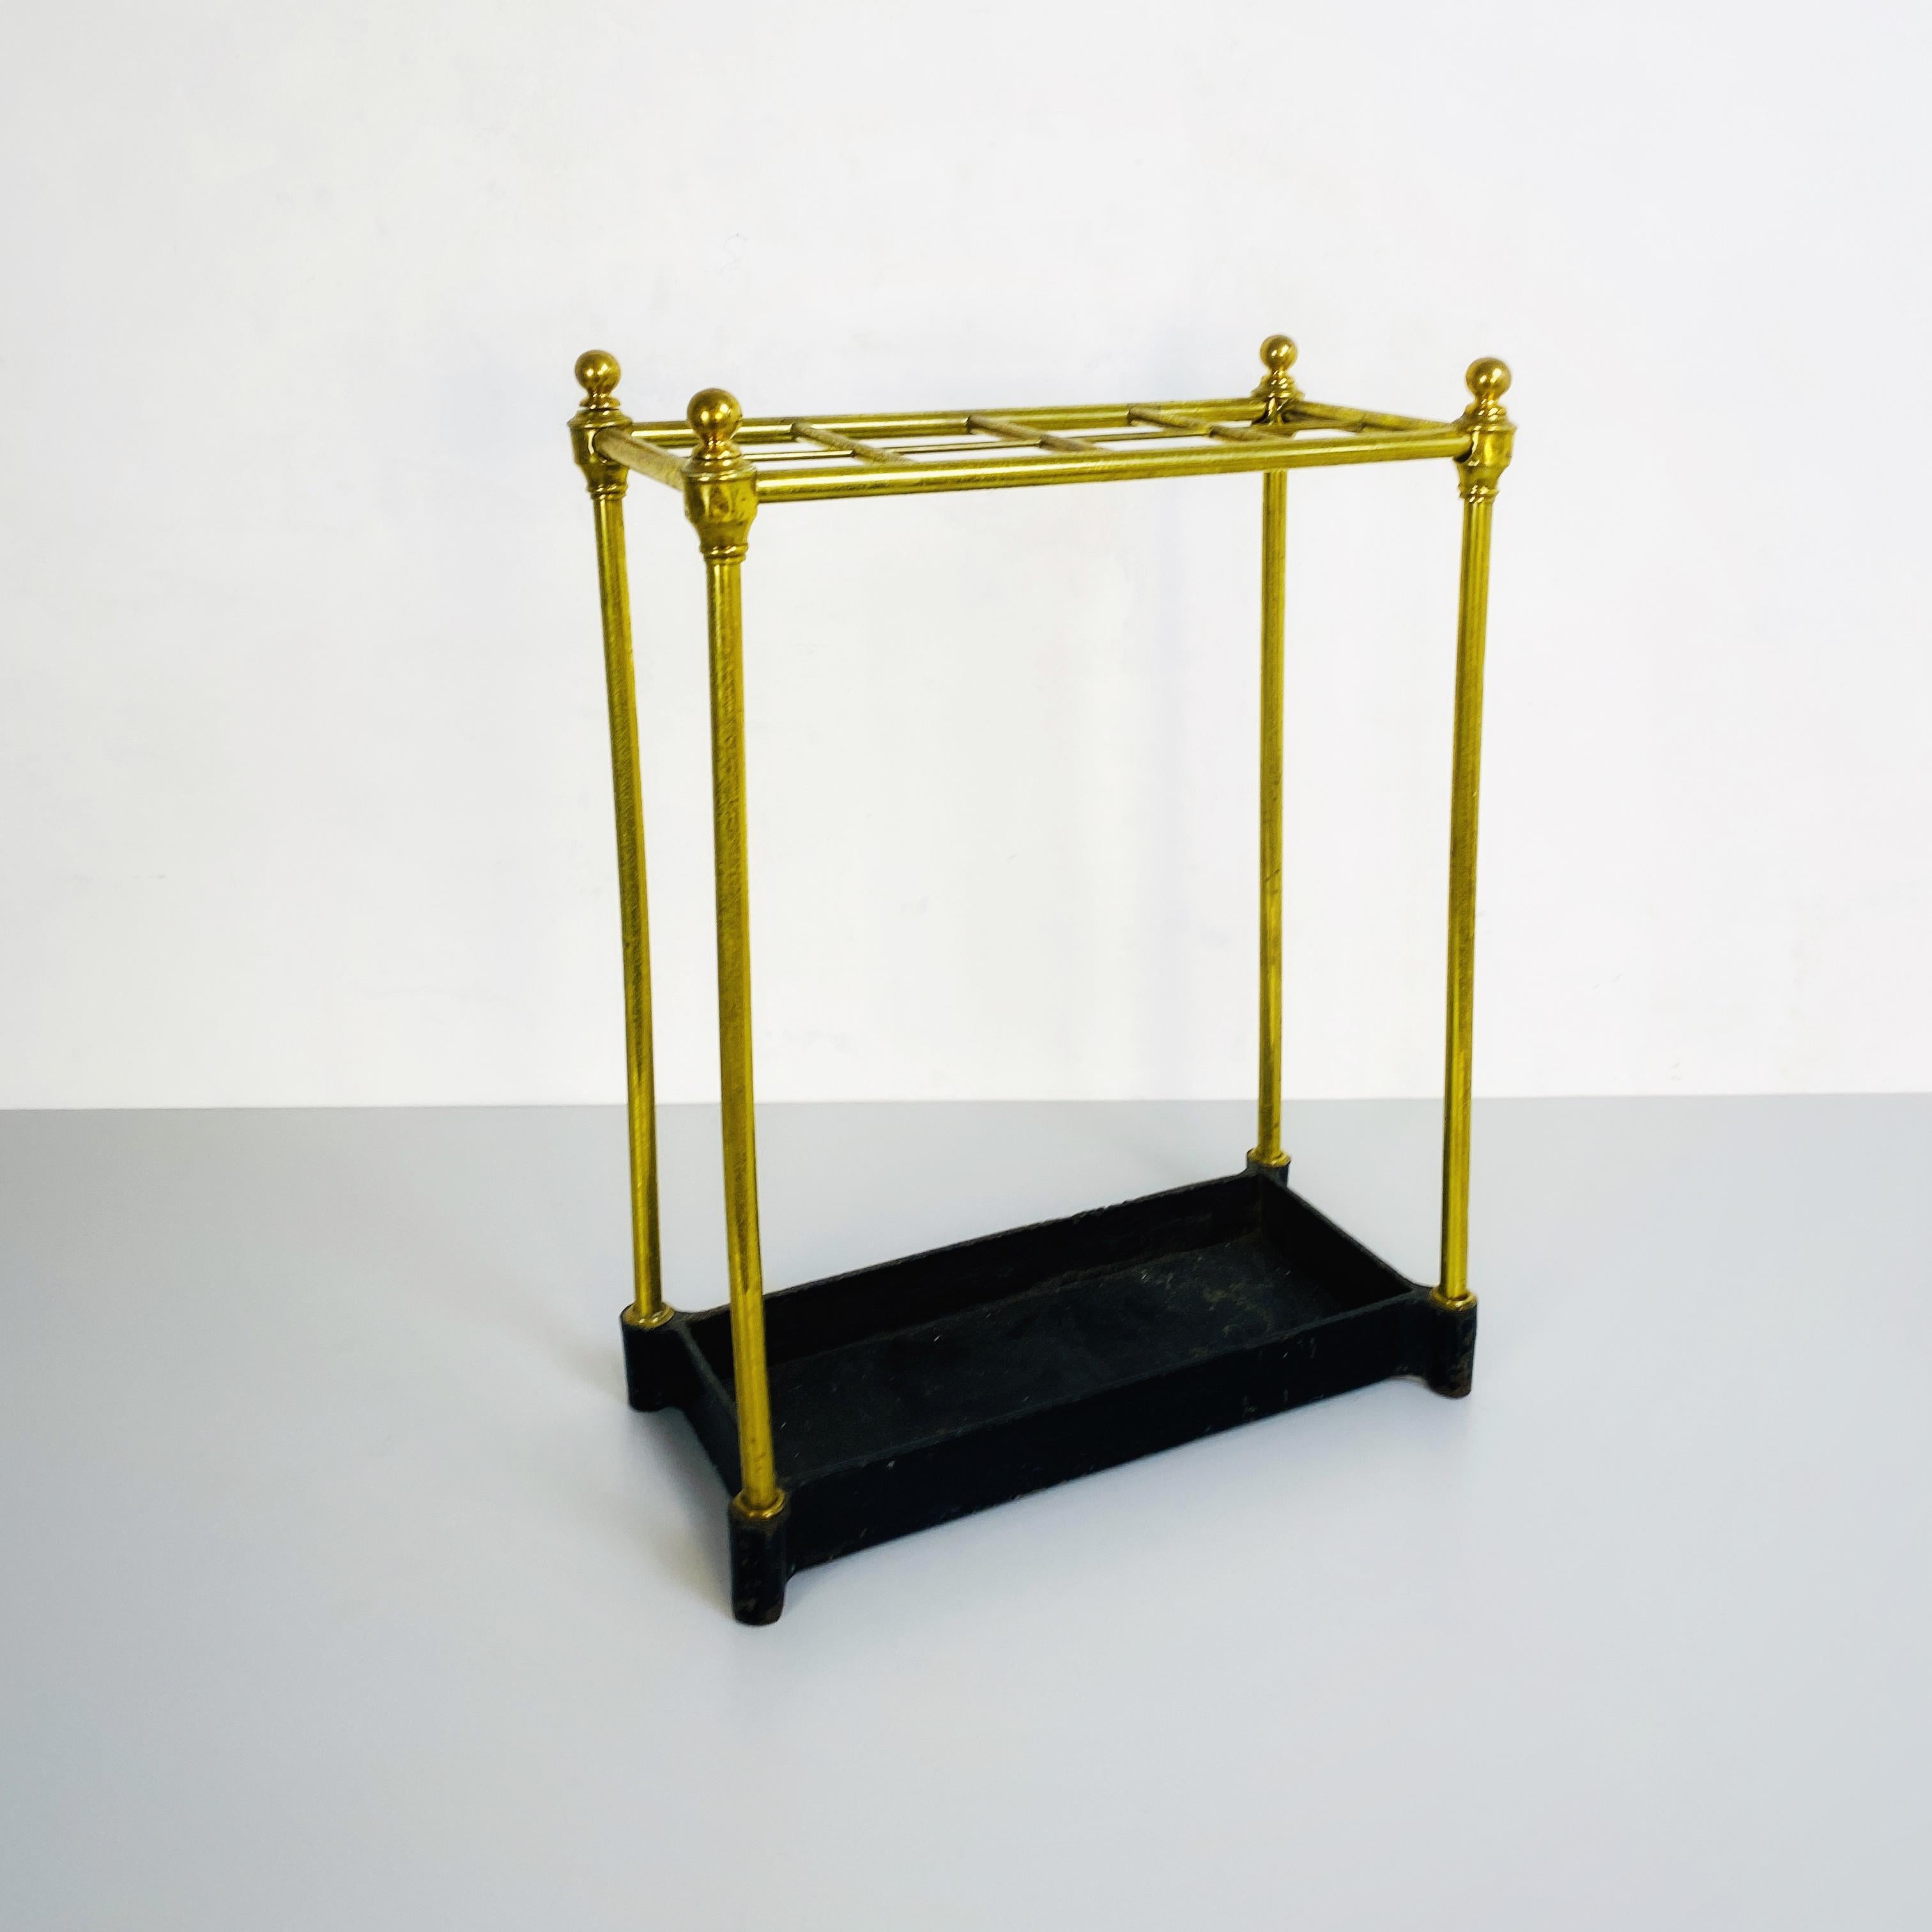 Italian mid-century brass umbrella stand with black iron base, 1950s
Brass umbrella stand with eight holes and decorative knobs, black wrought iron base.

Good conditions.

Measures in cm 24 x 48 x 61 H.